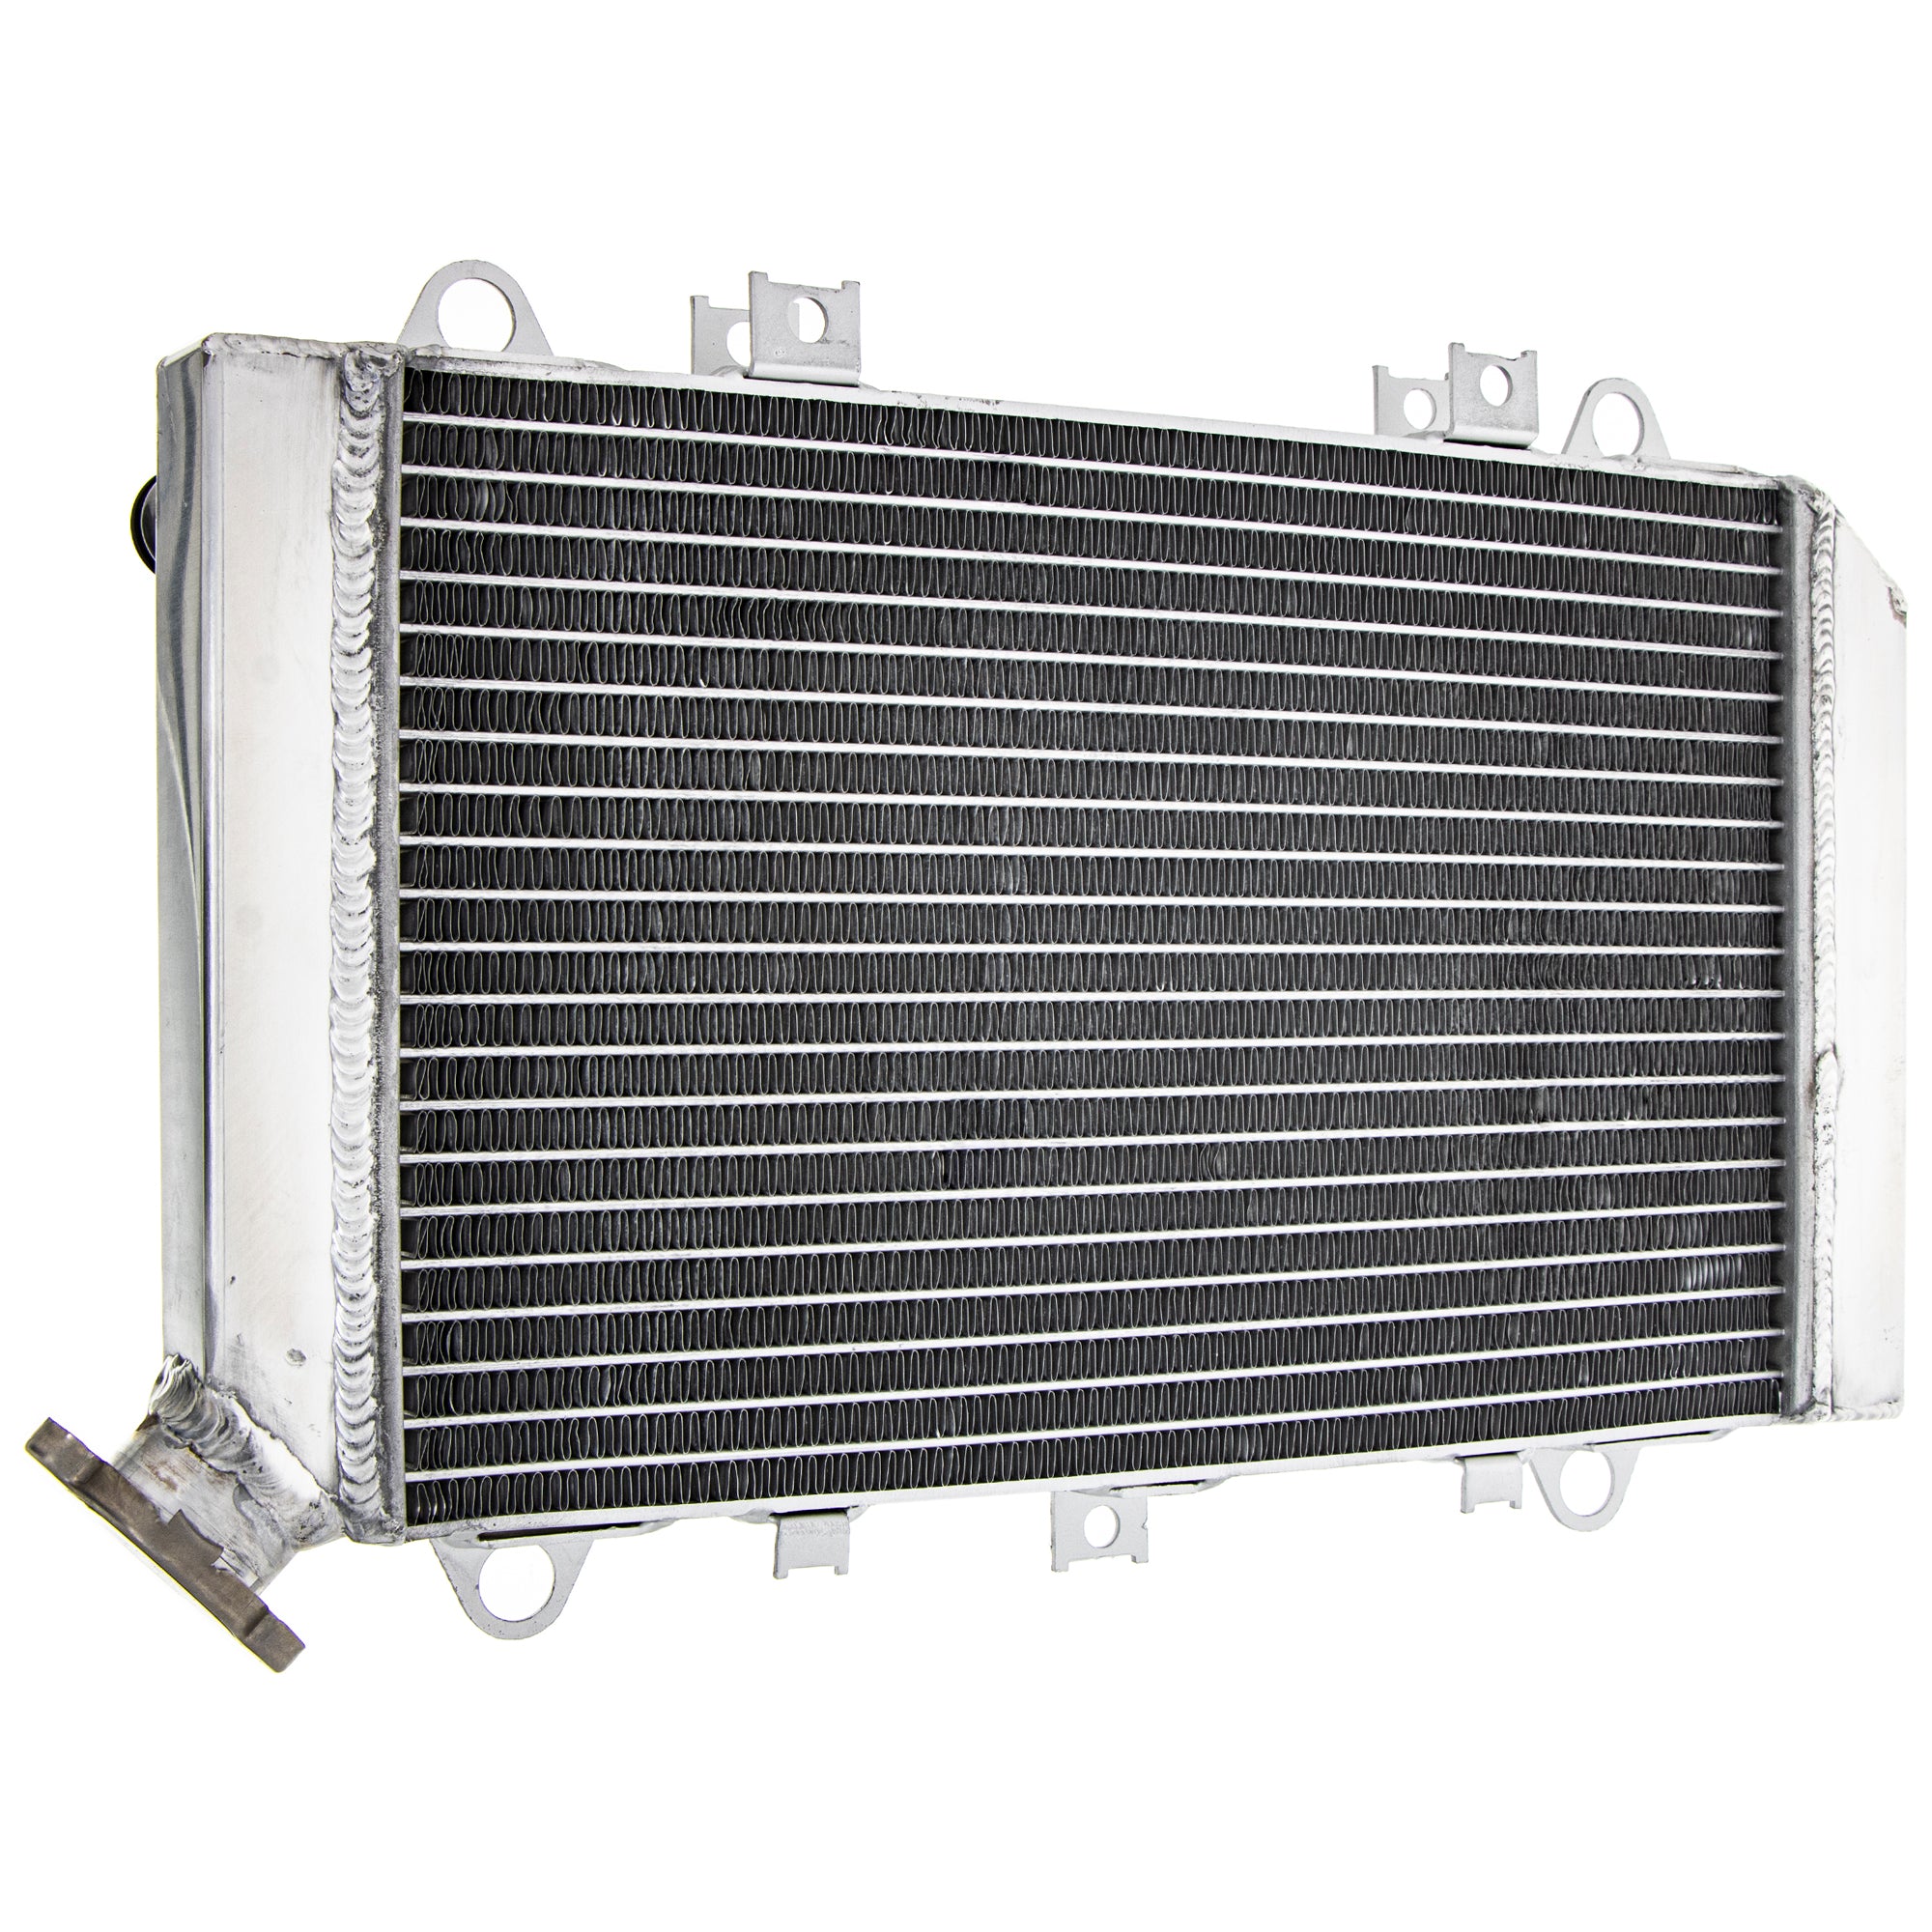 NICHE 519-CRD2243A High Capacity Radiator for zOTHER